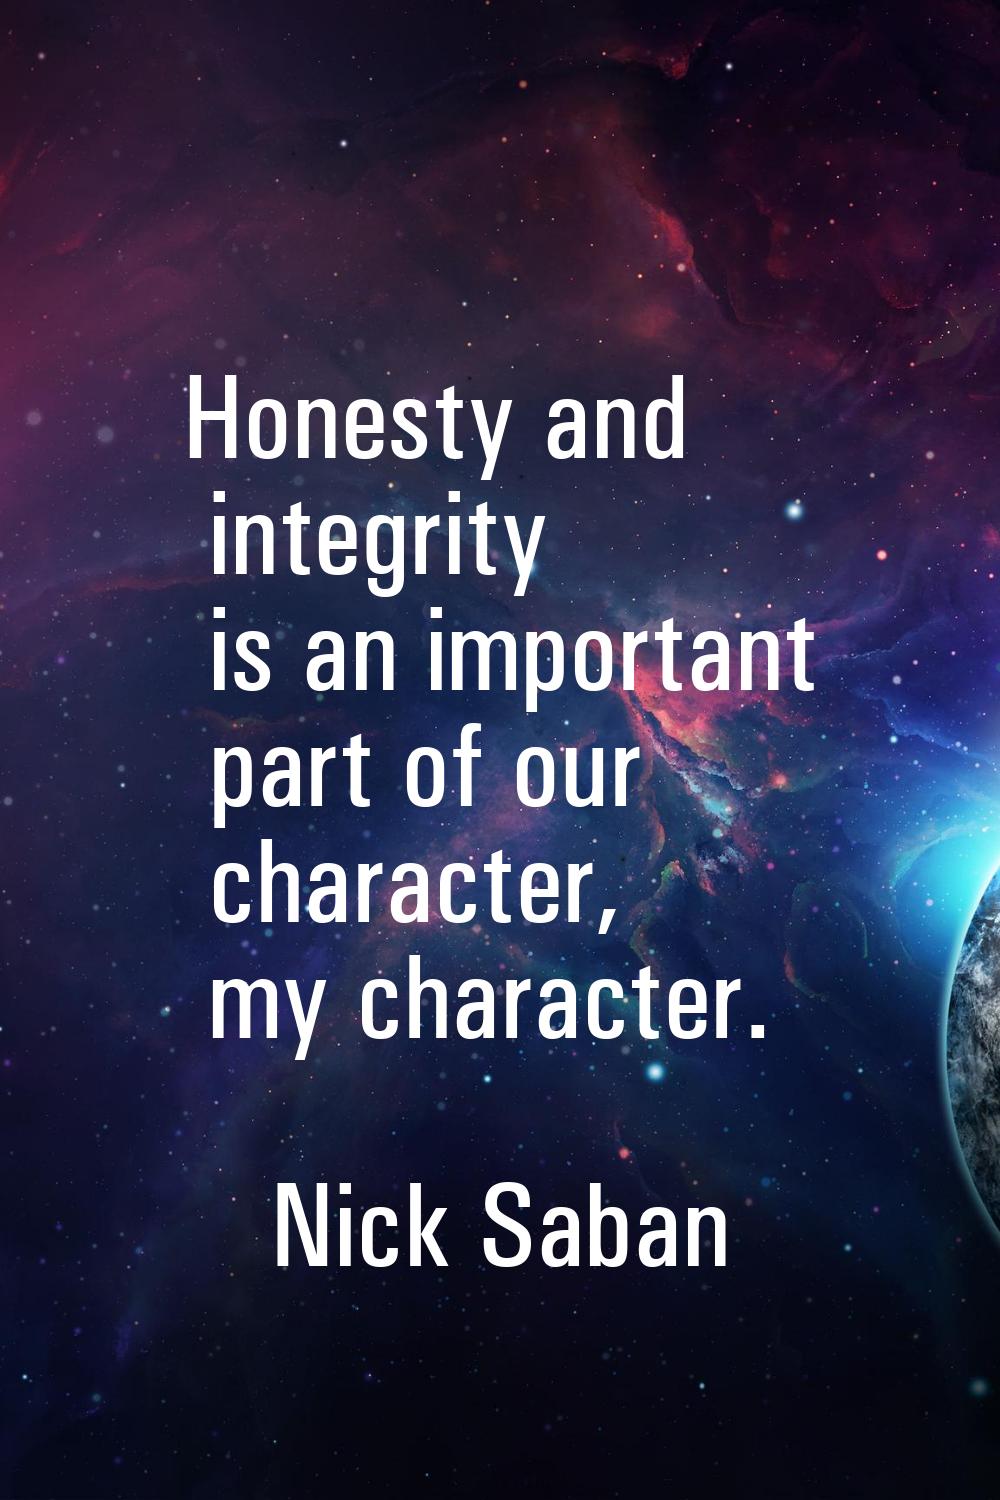 Honesty and integrity is an important part of our character, my character.